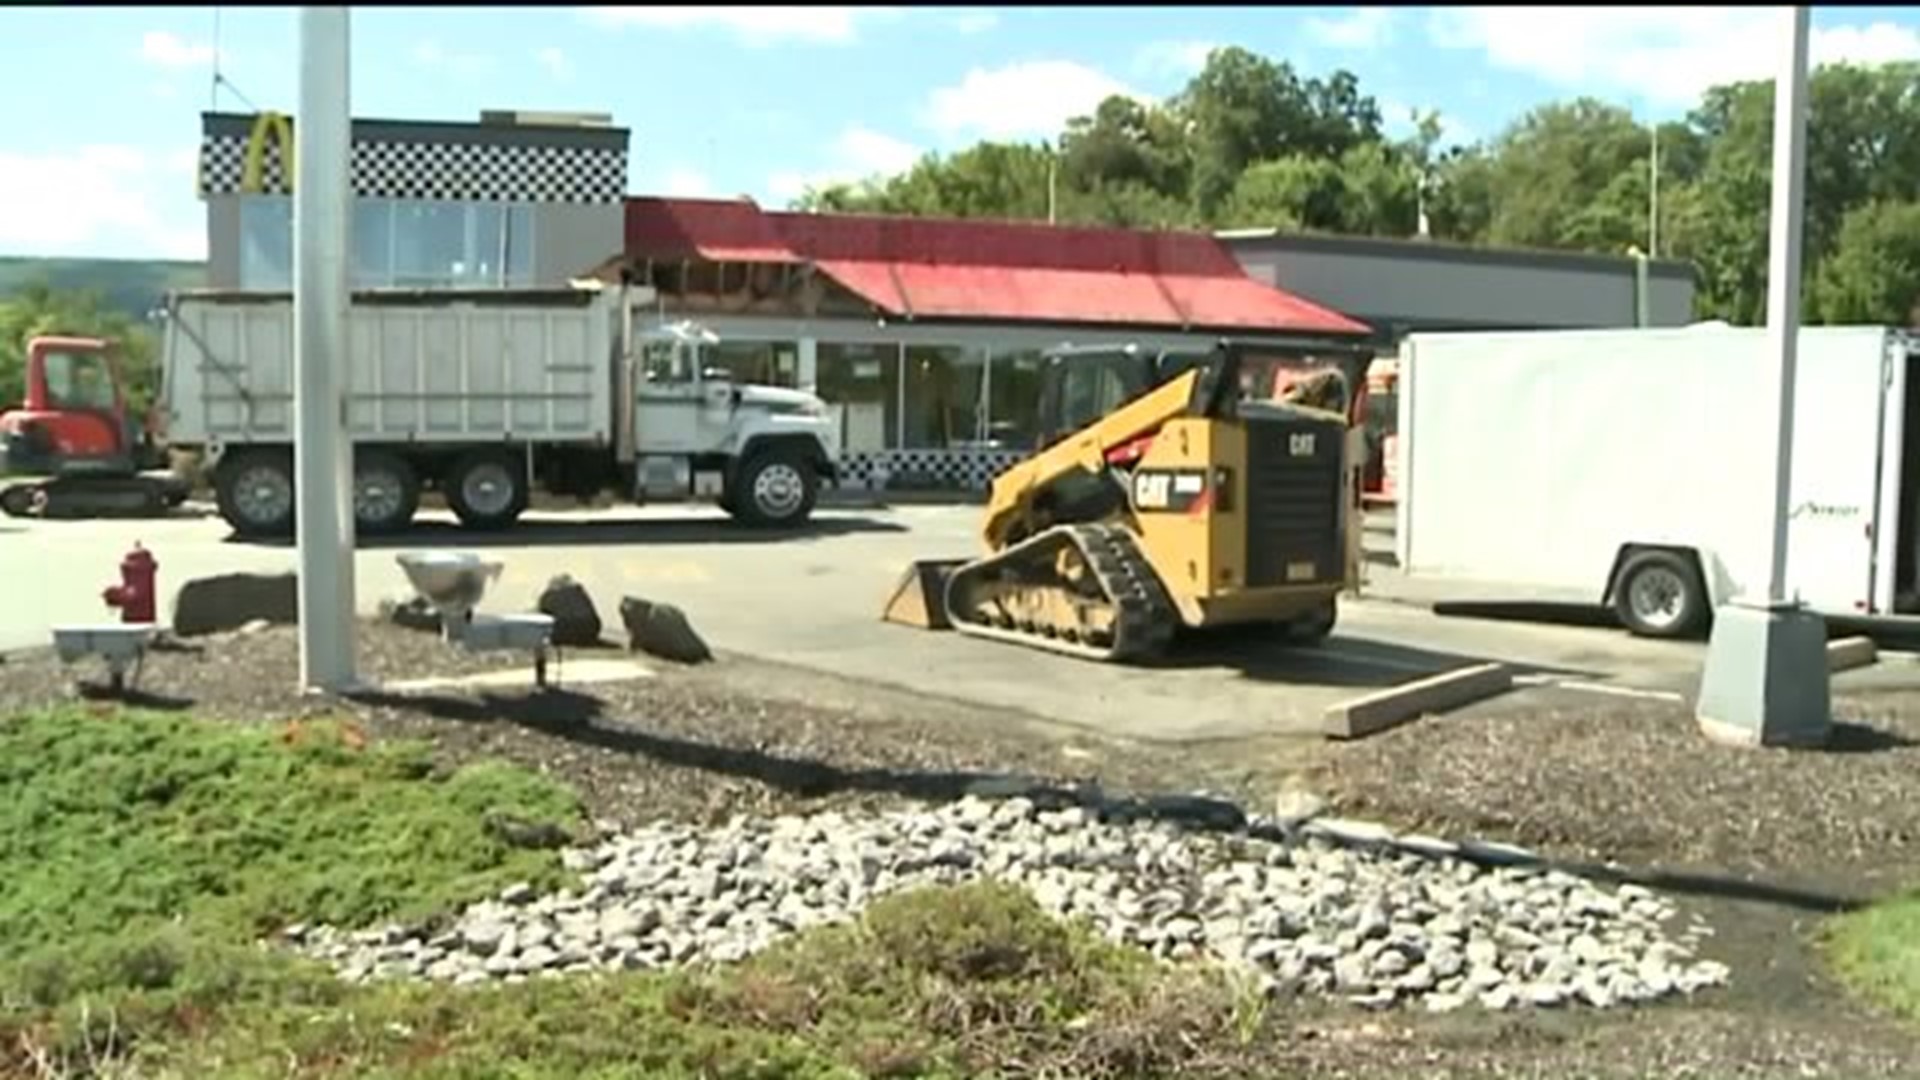 McDonald's in Muncy Closed for Renovations